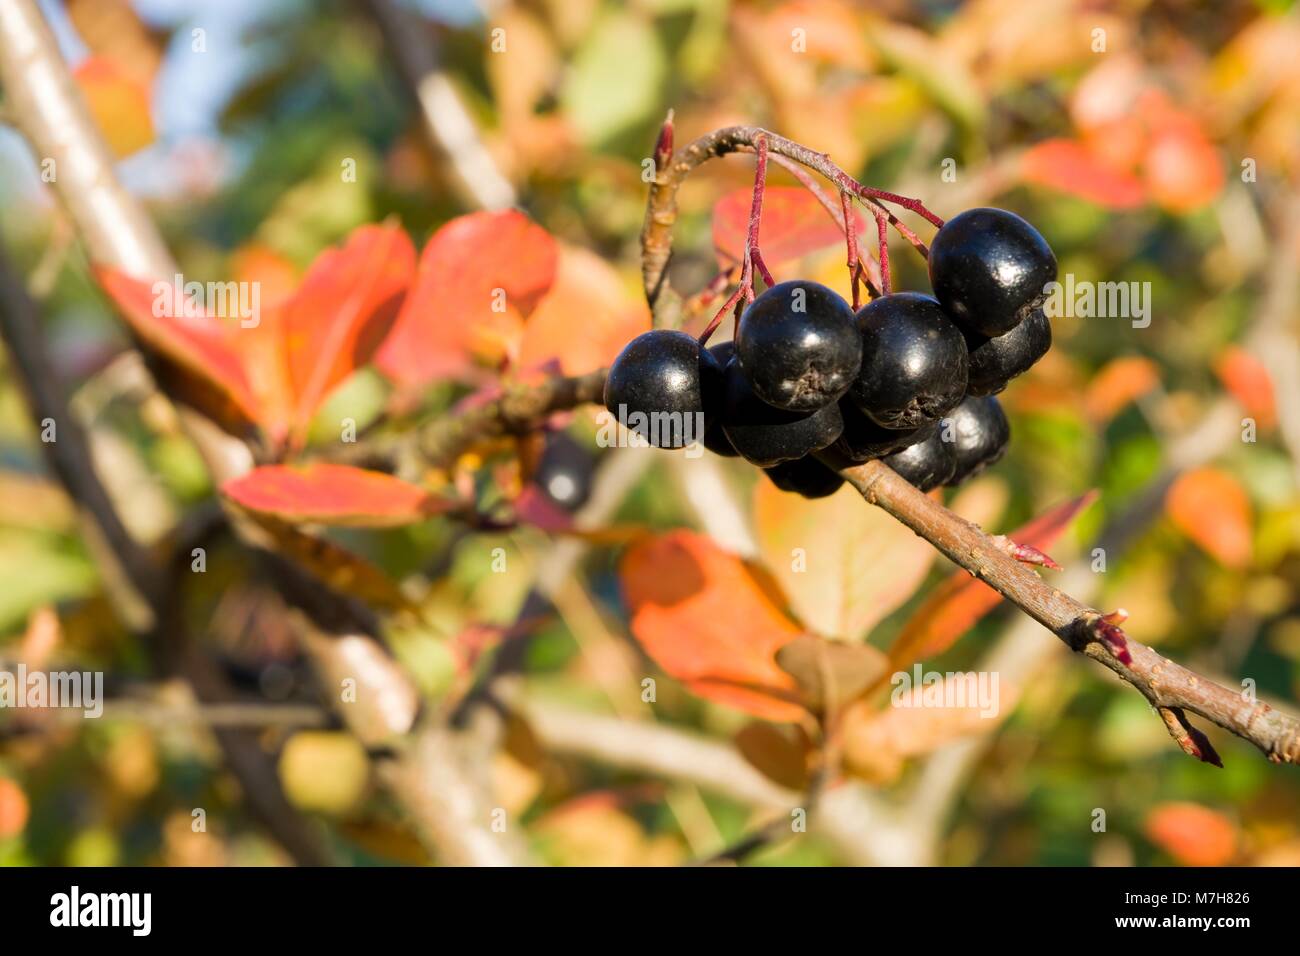 Selective focus on ripe aronia berries on a bush in autumn colors Stock Photo